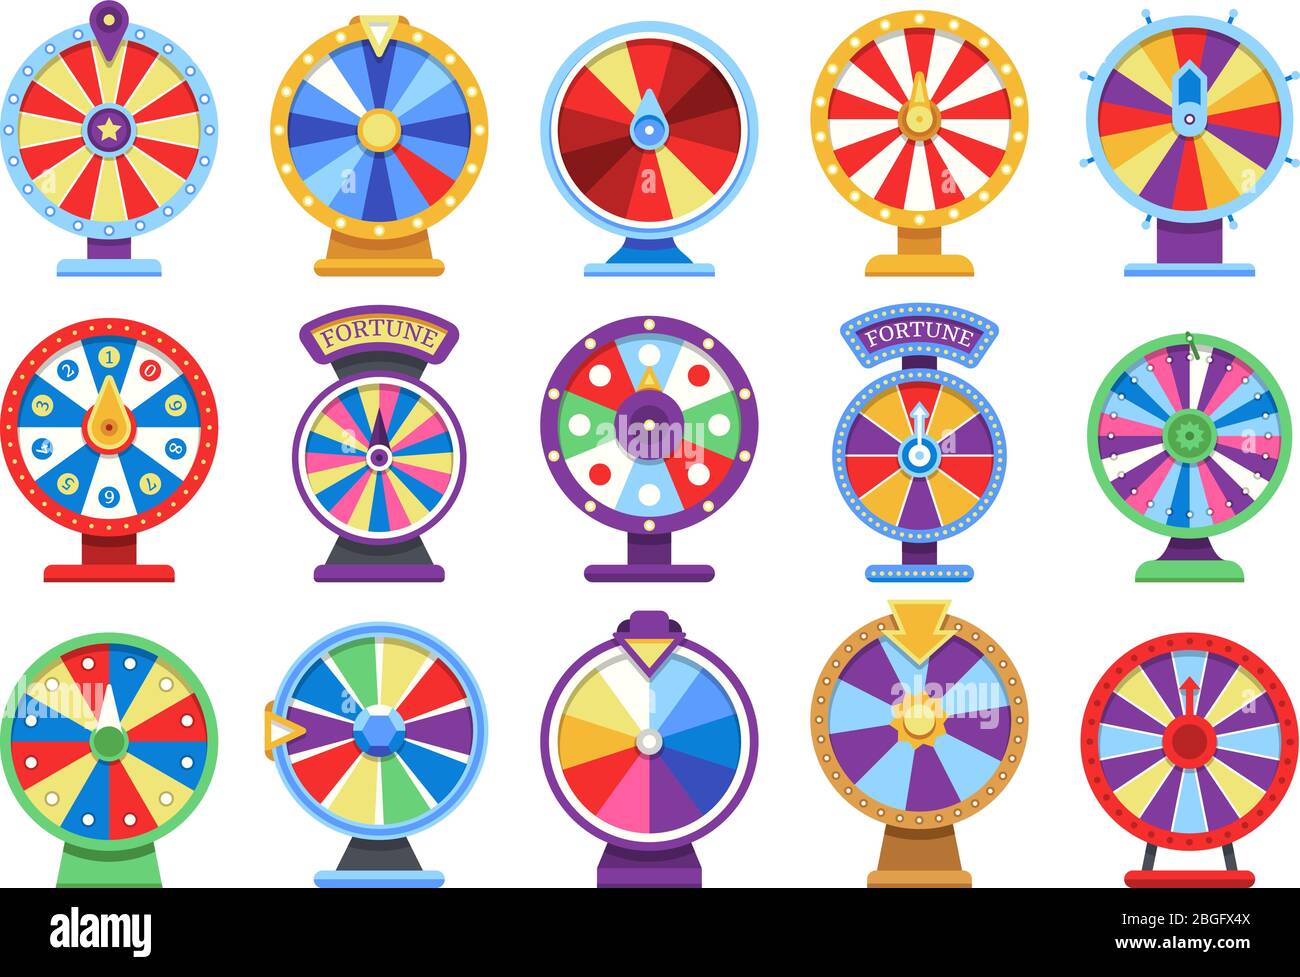 Fortune wheels flat icons set. Spin lucky wheel casino money game symbols. Fortune wheel game, gamble roulette play. Vector illustration Stock Vector